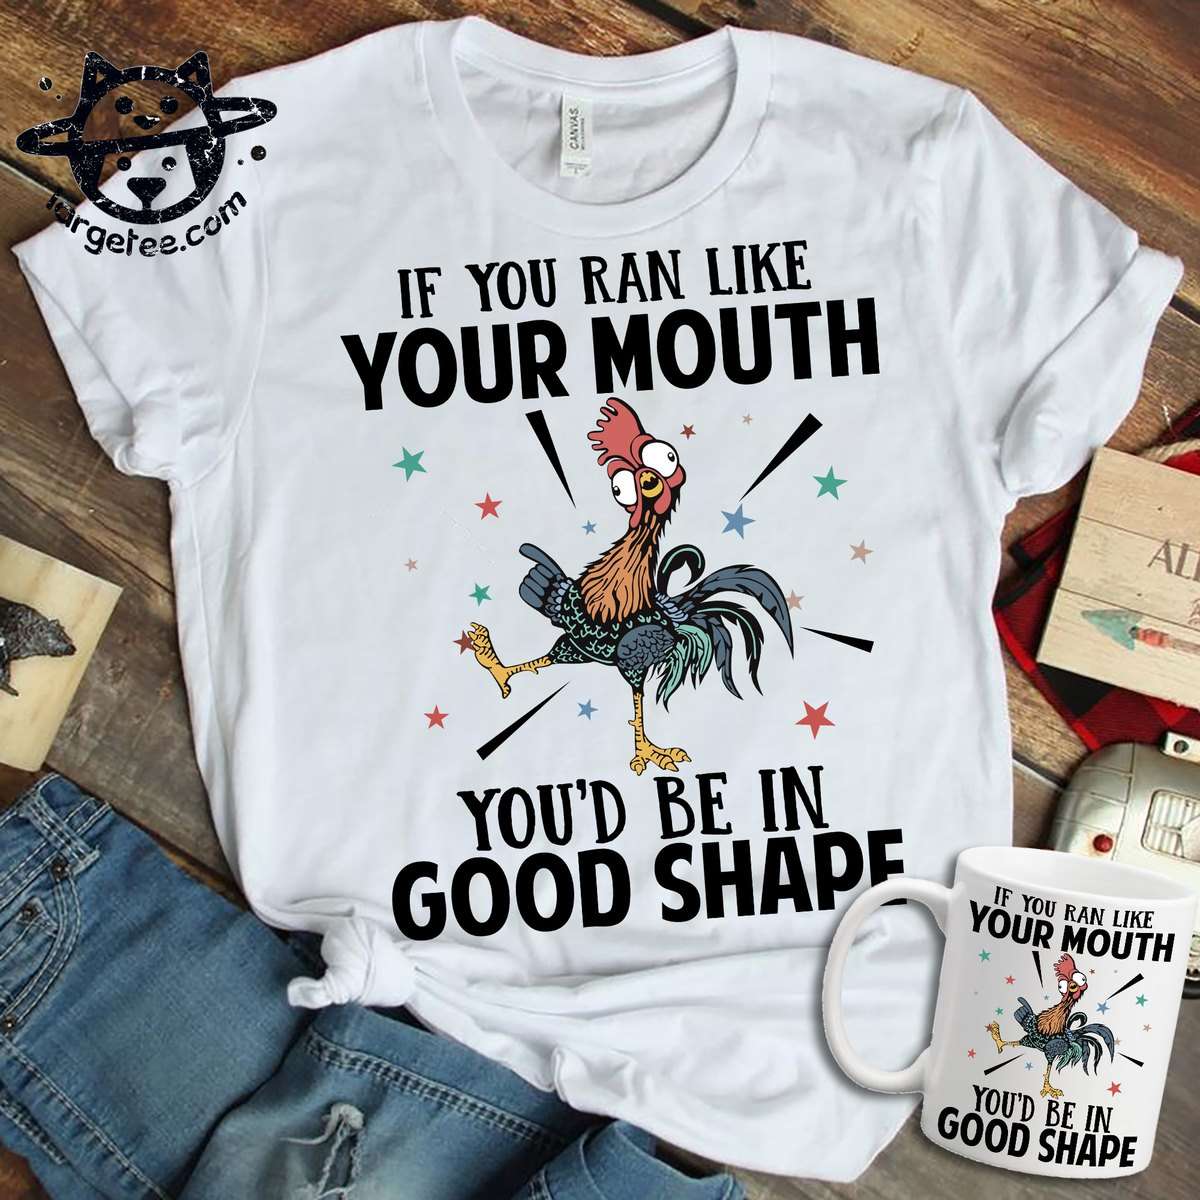 If you ran like your mouth, you'd be in good shape - Cranky chicken